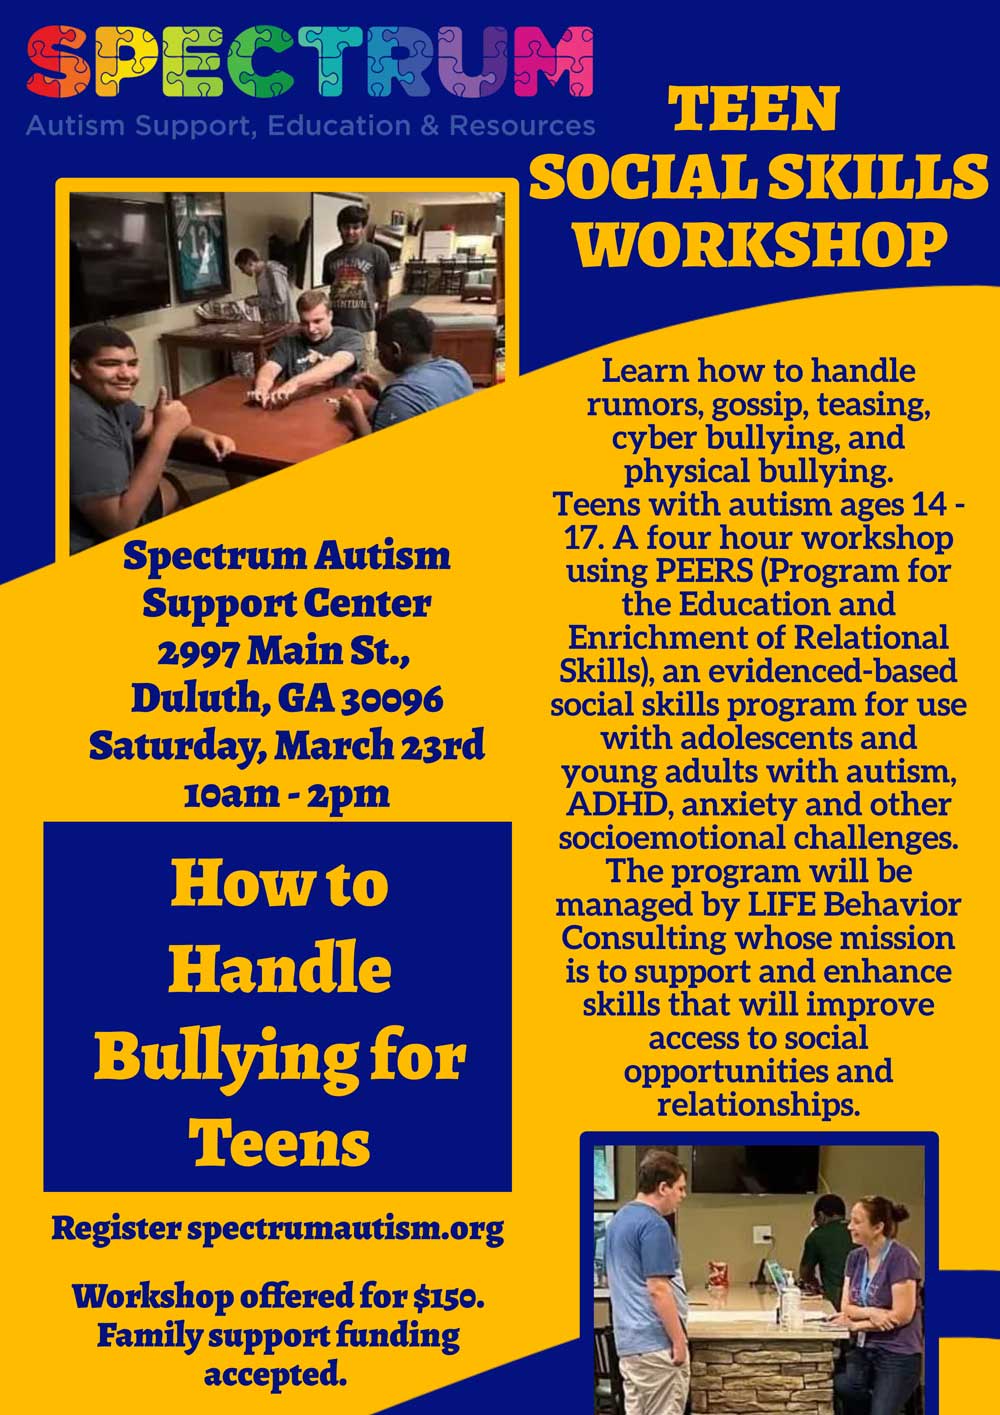 How To Handle Bullying For Teens Workshop